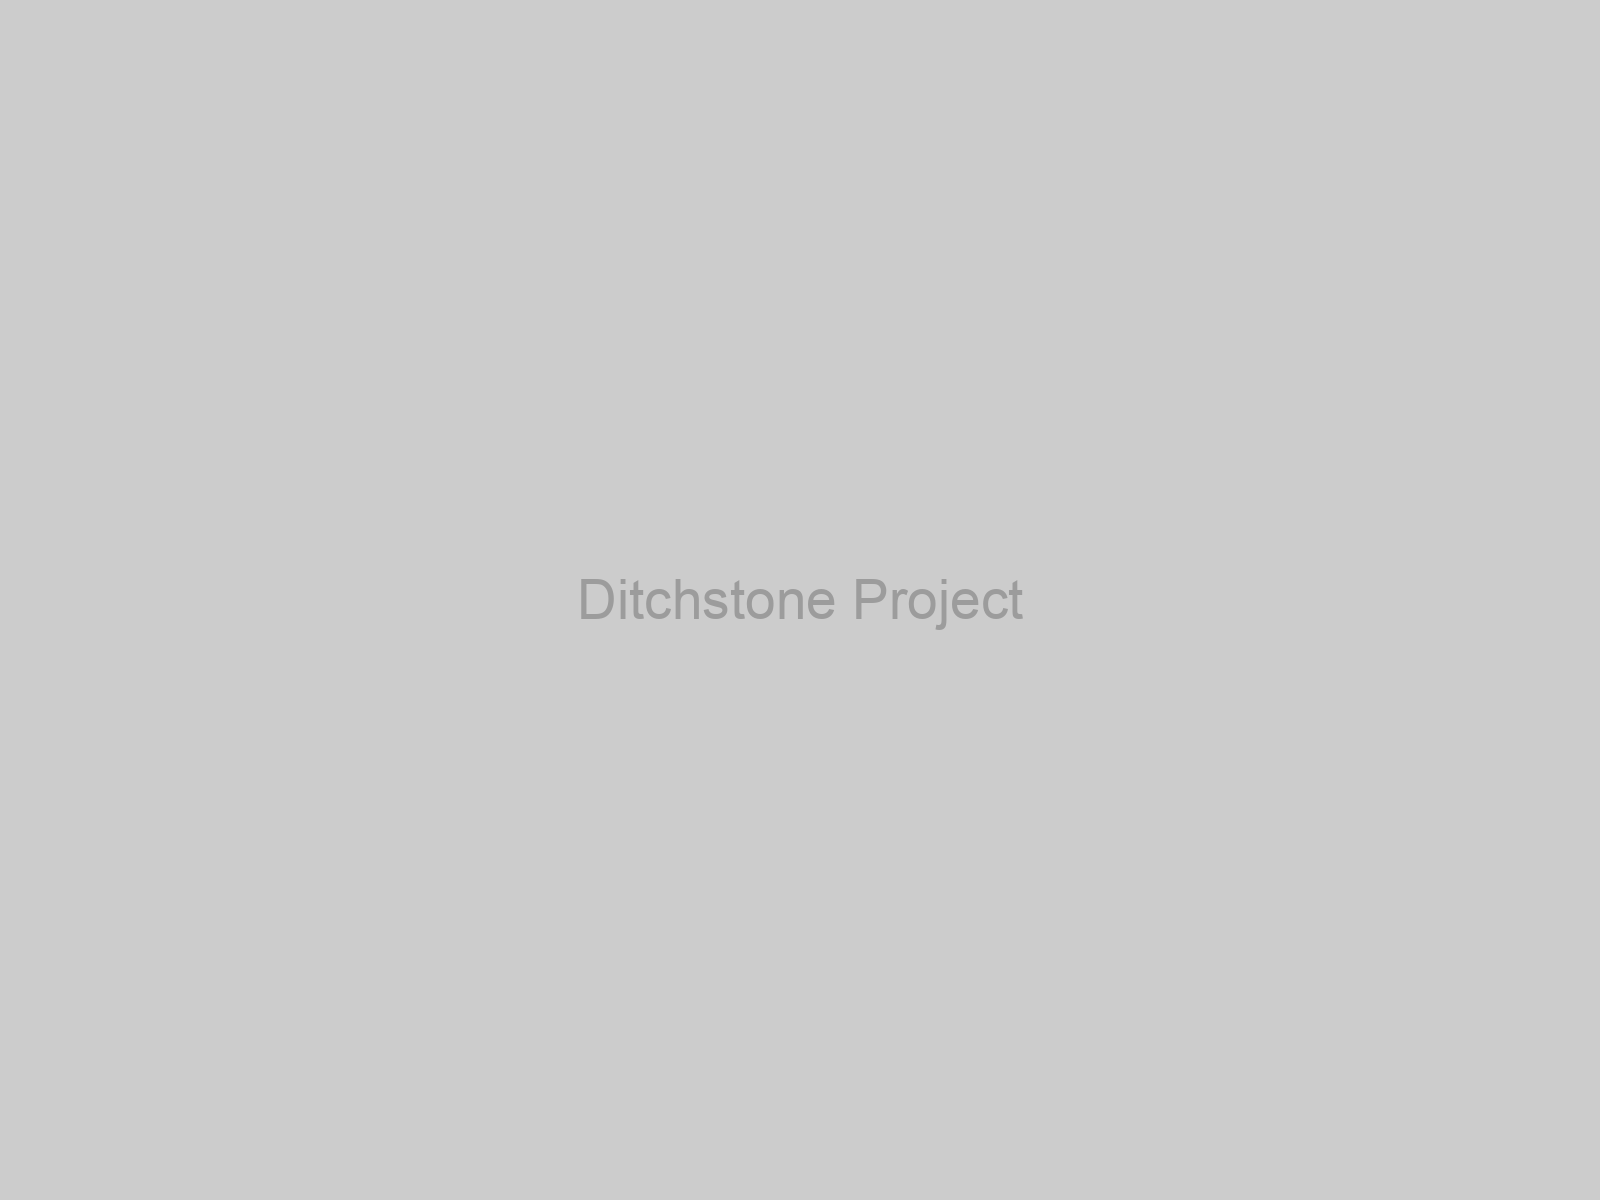 Ditchstone Project